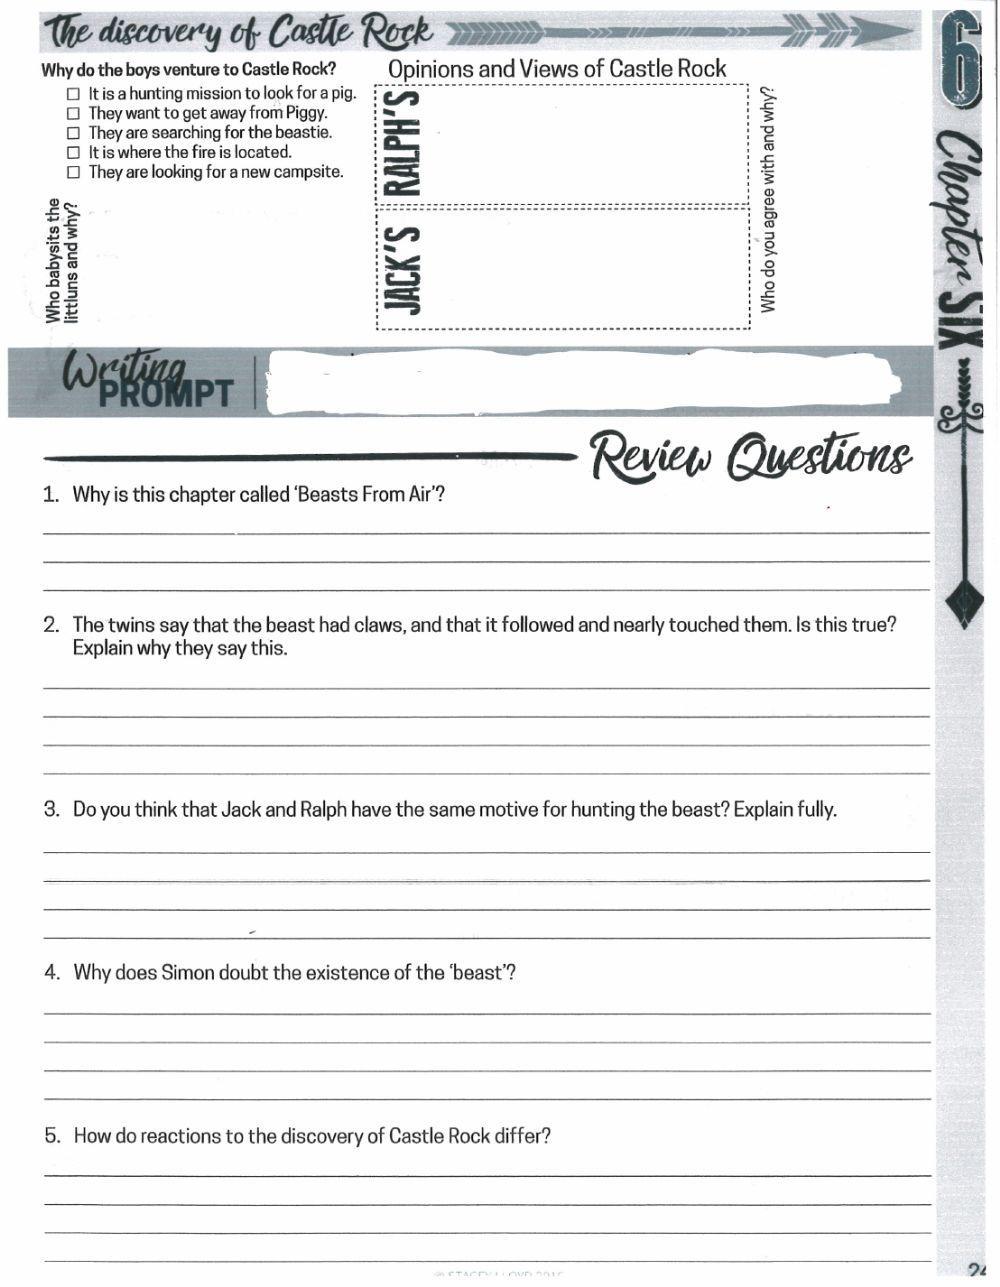 Lord of the Flies ch. 6 worksheet